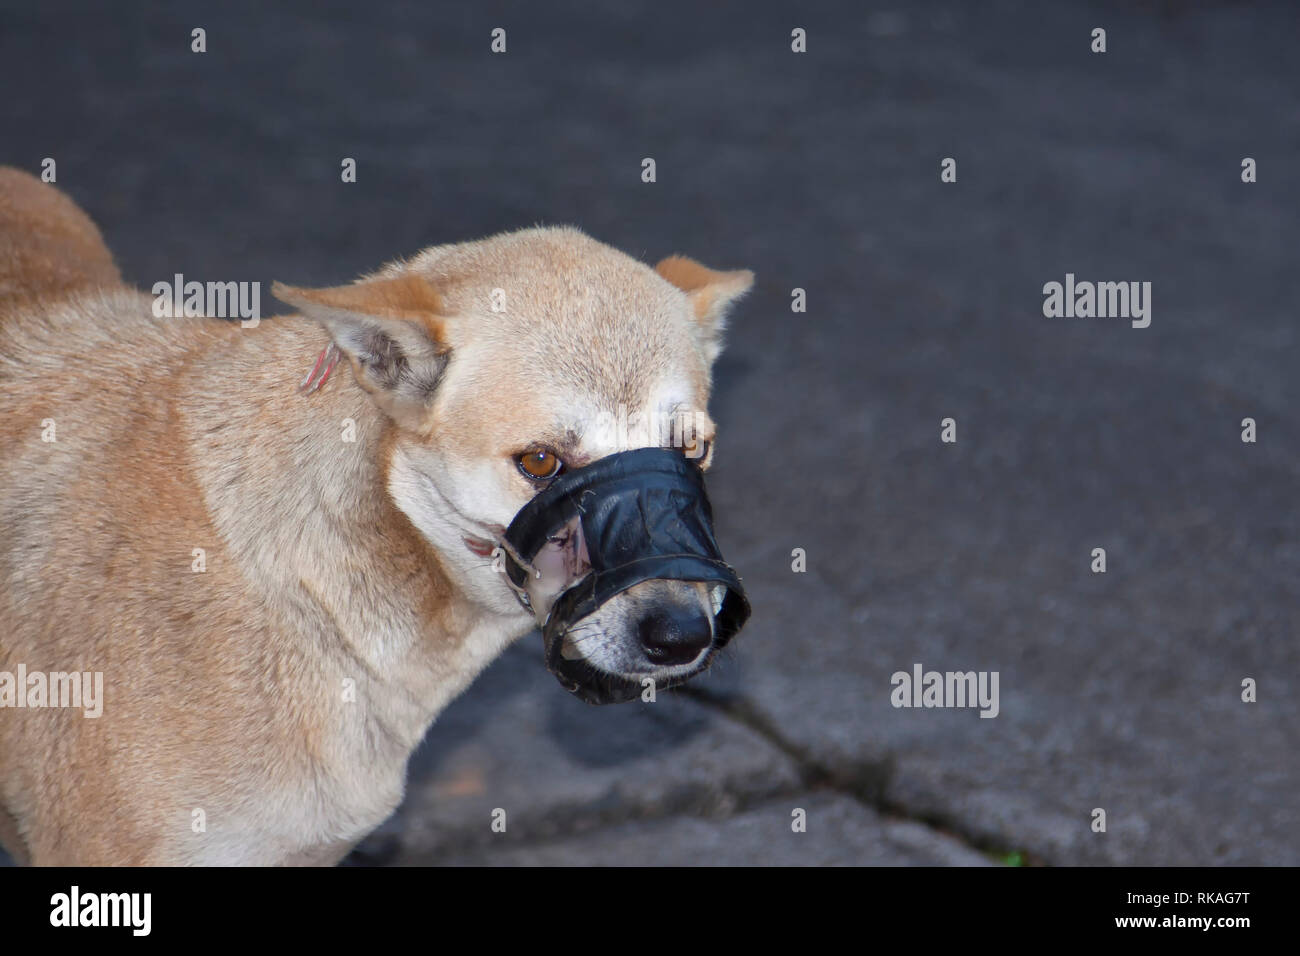 Snappy dog with an unusual muzzle in Thailand Stock Photo